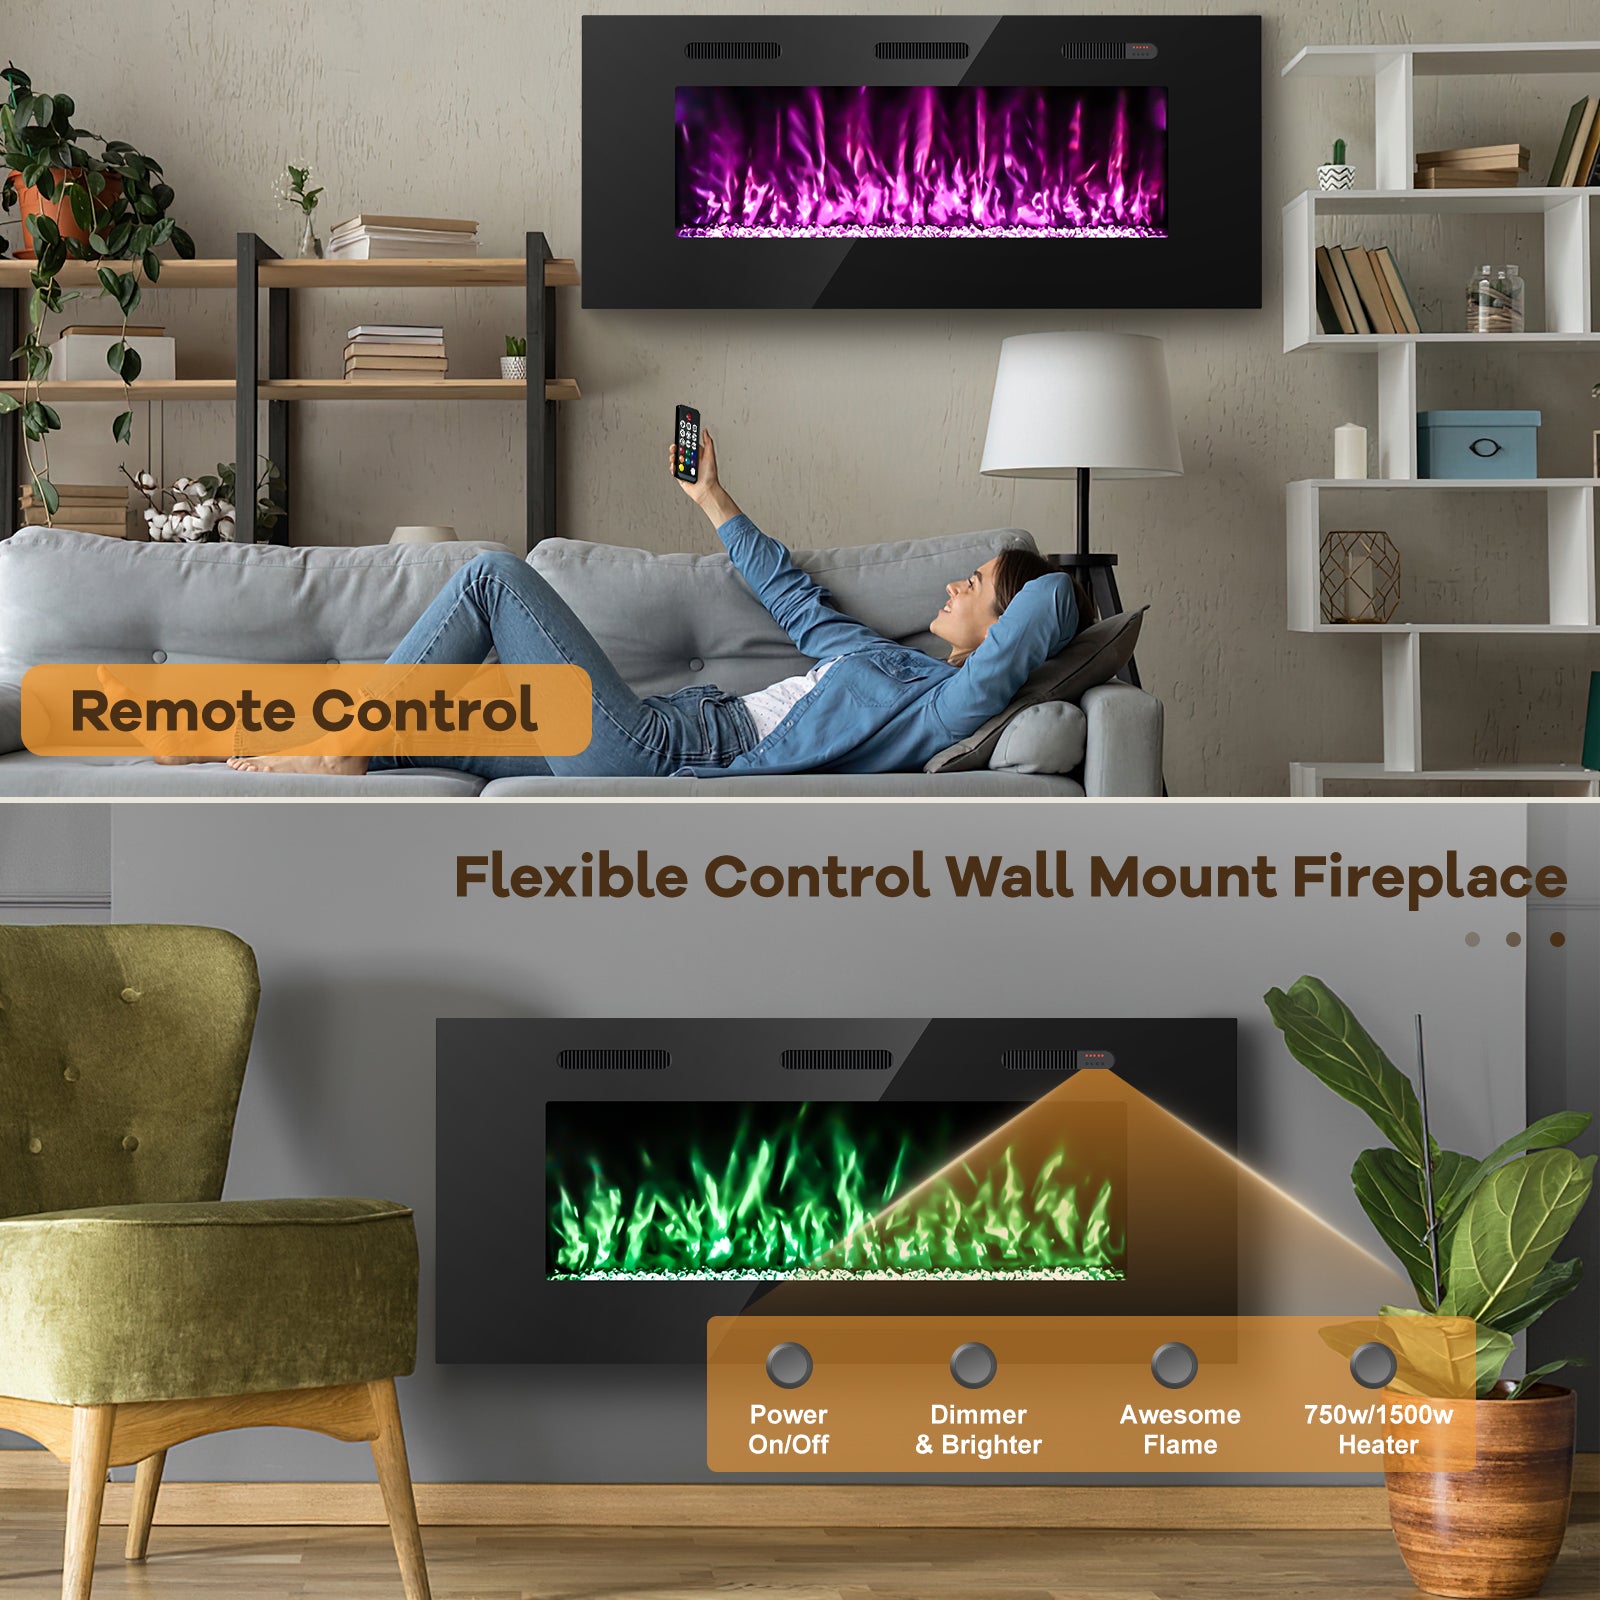 50-inch Ultra Thin Wall Mounted Electric Fireplace Heater, Modern Fire Place Eletric Fireplace for Indoor Living Room Bedroom Use, Realistic LED Flame with Remote Control, Crystals, Black